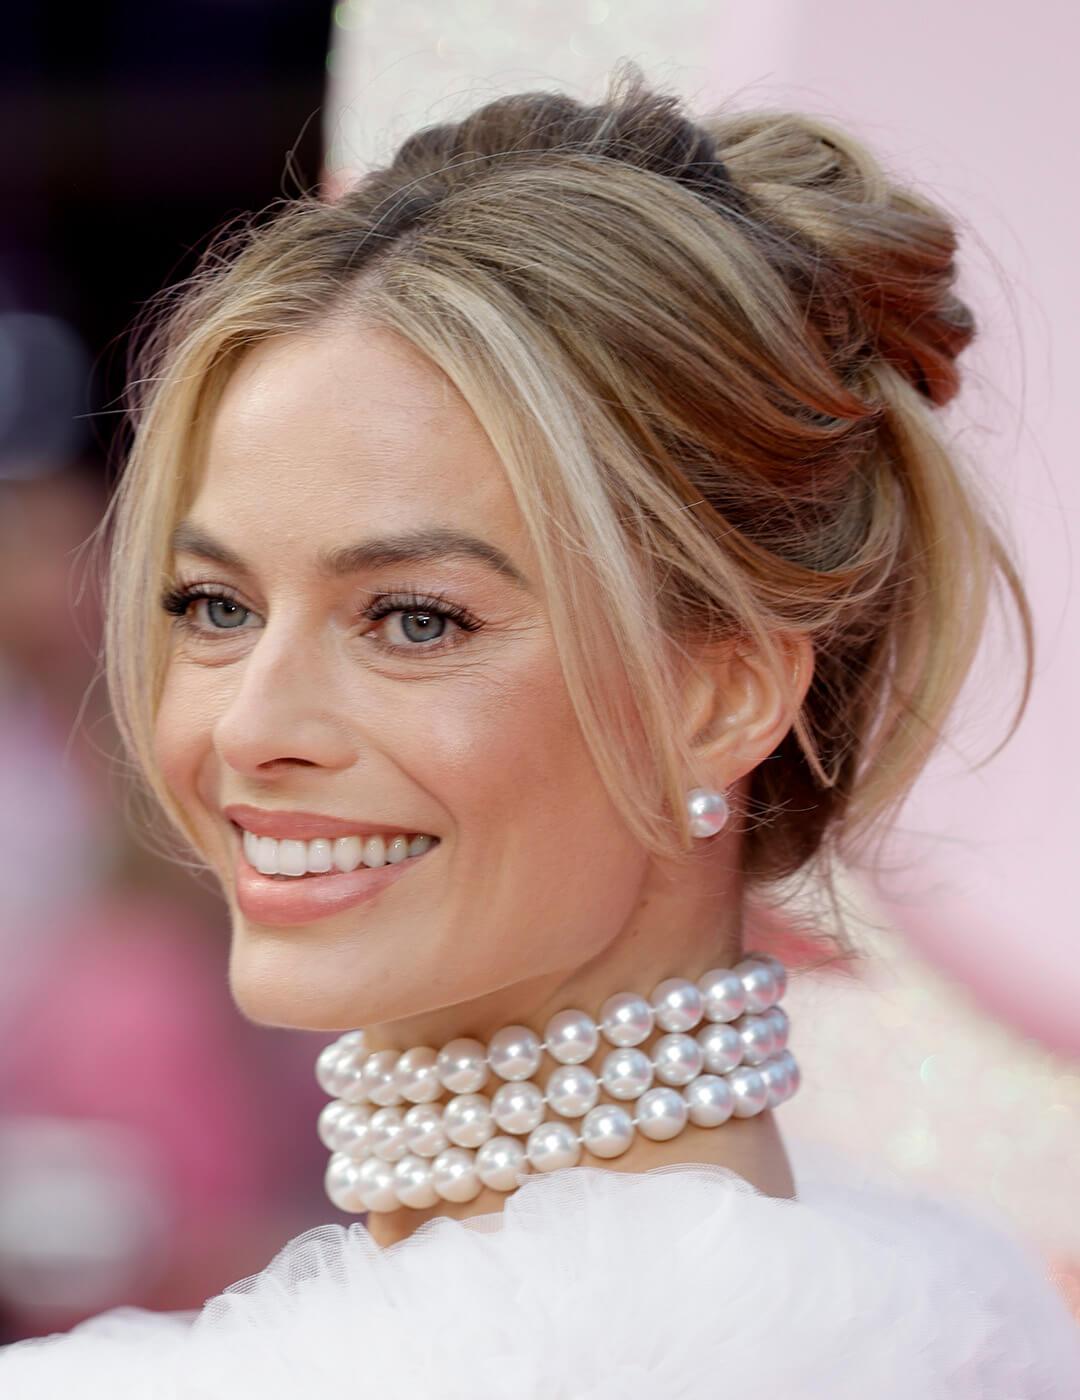 Margot Robbie attends The European Premiere Of "Barbie" at Cineworld Leicester Square on July 12, 2023 in London, England.